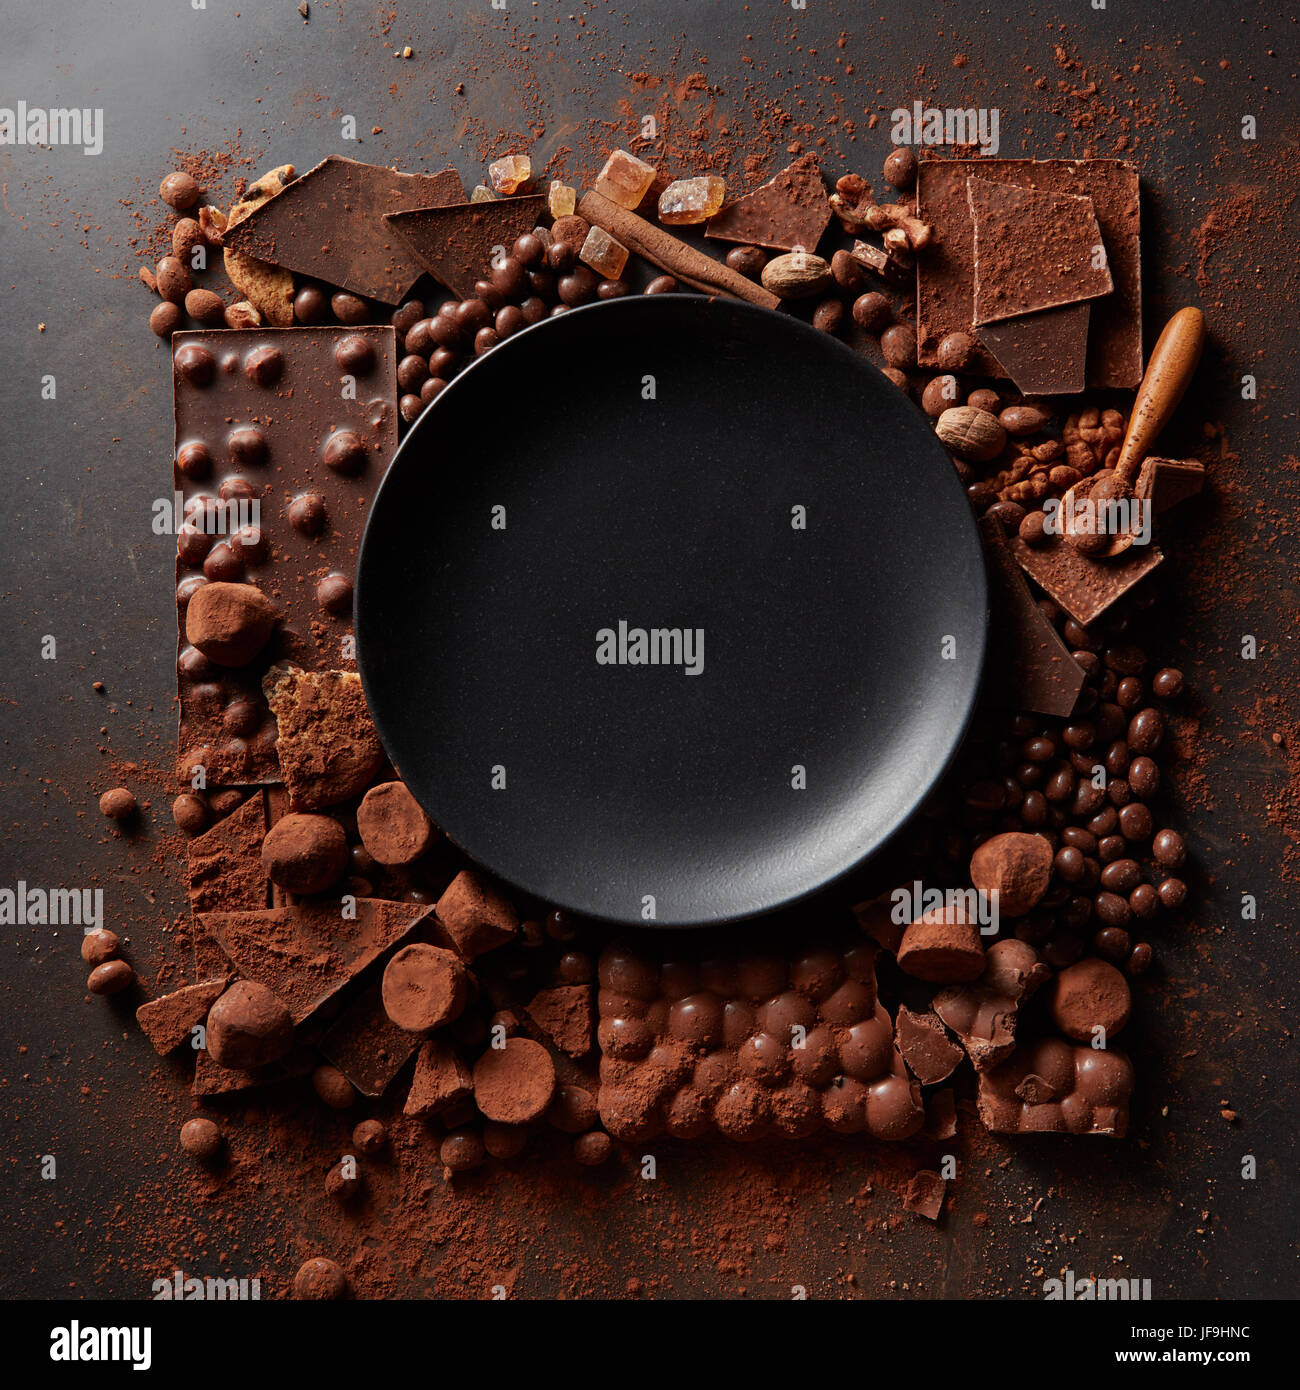 frame of chocolates with plate Stock Photo